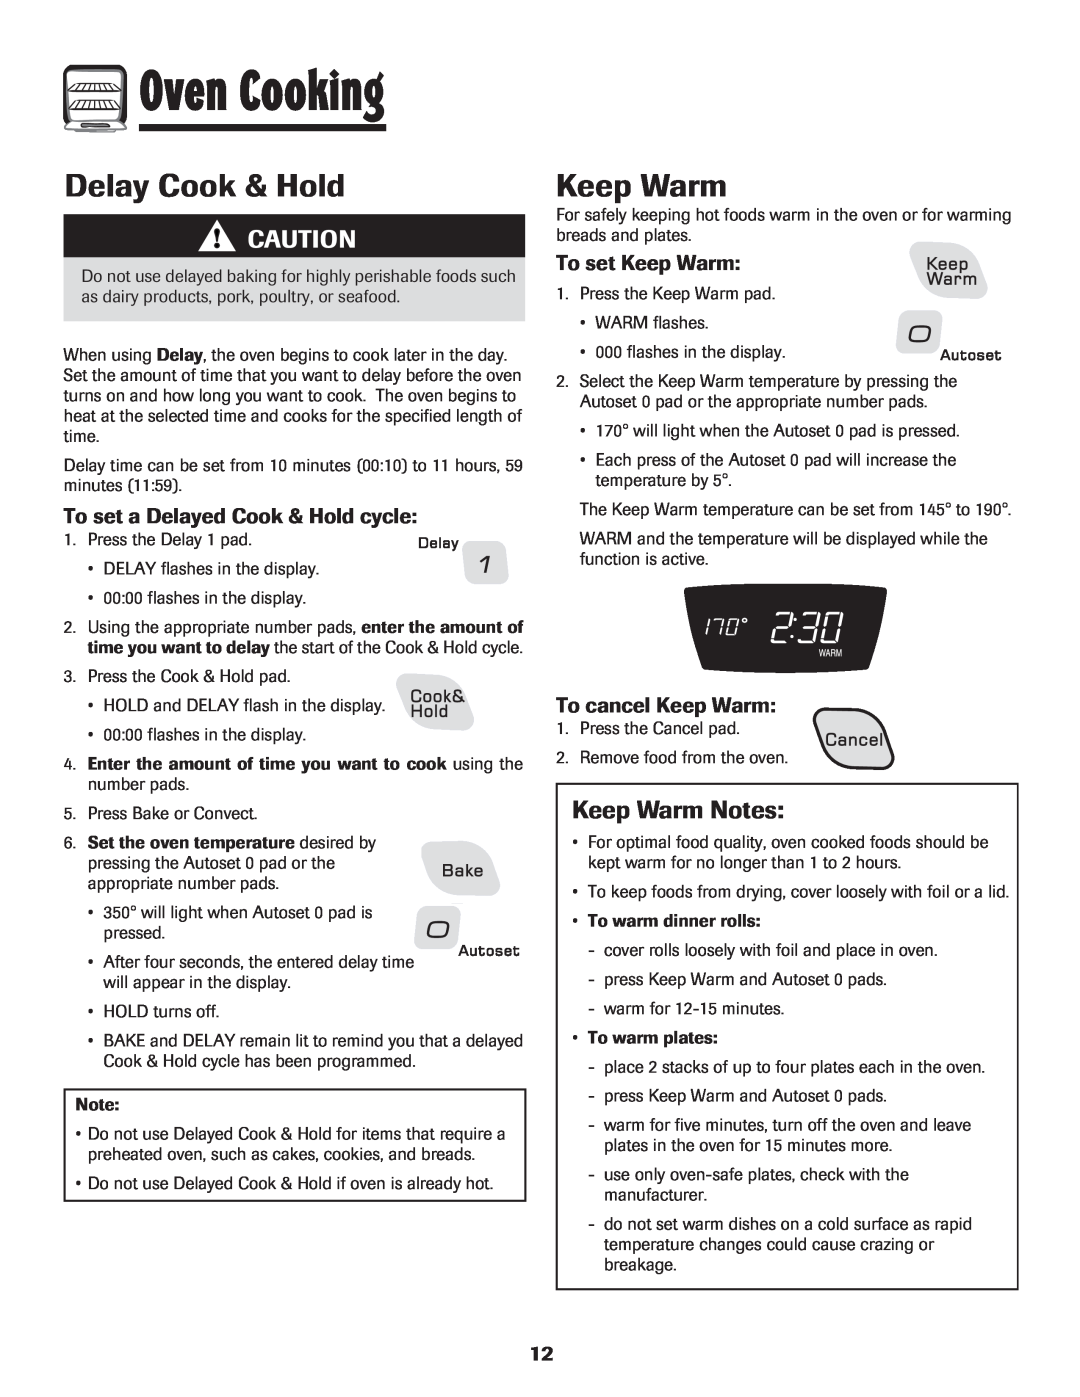 Amana AGR5835QDW Delay Cook & Hold, Keep Warm Notes, To set a Delayed Cook & Hold cycle, To set Keep Warm 